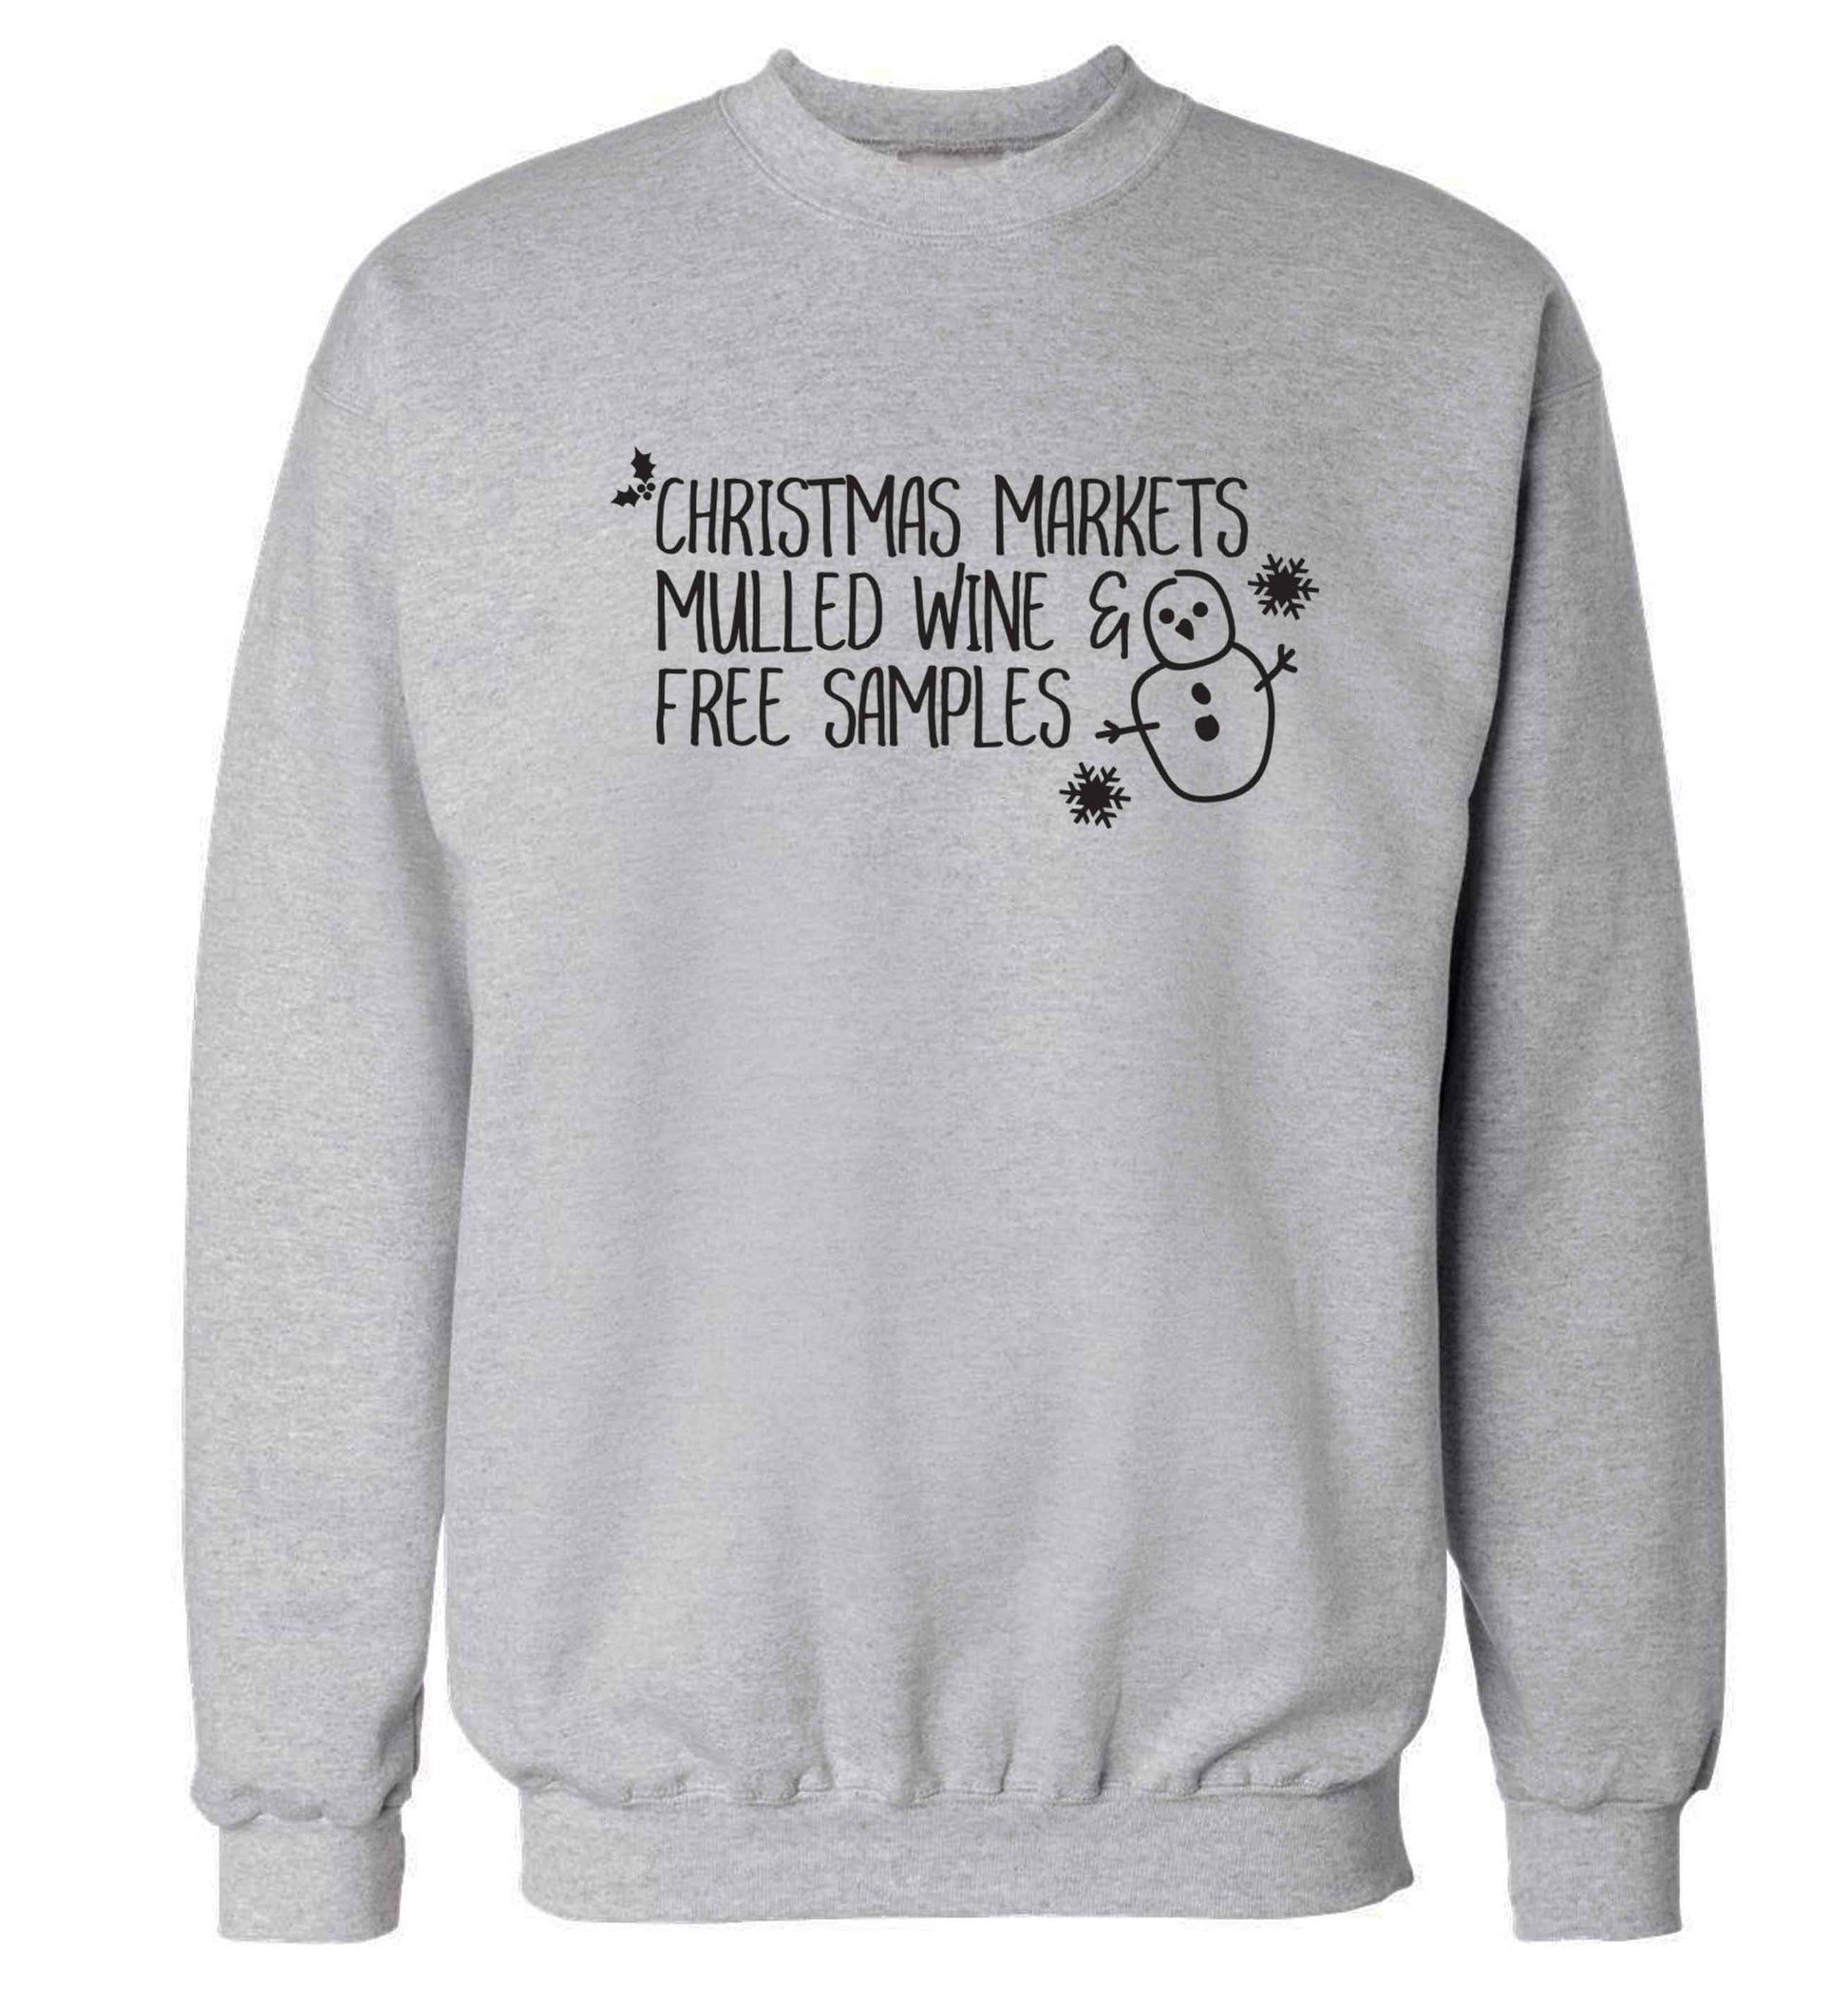 Christmas market mulled wine & free samples Adult's unisex grey Sweater 2XL